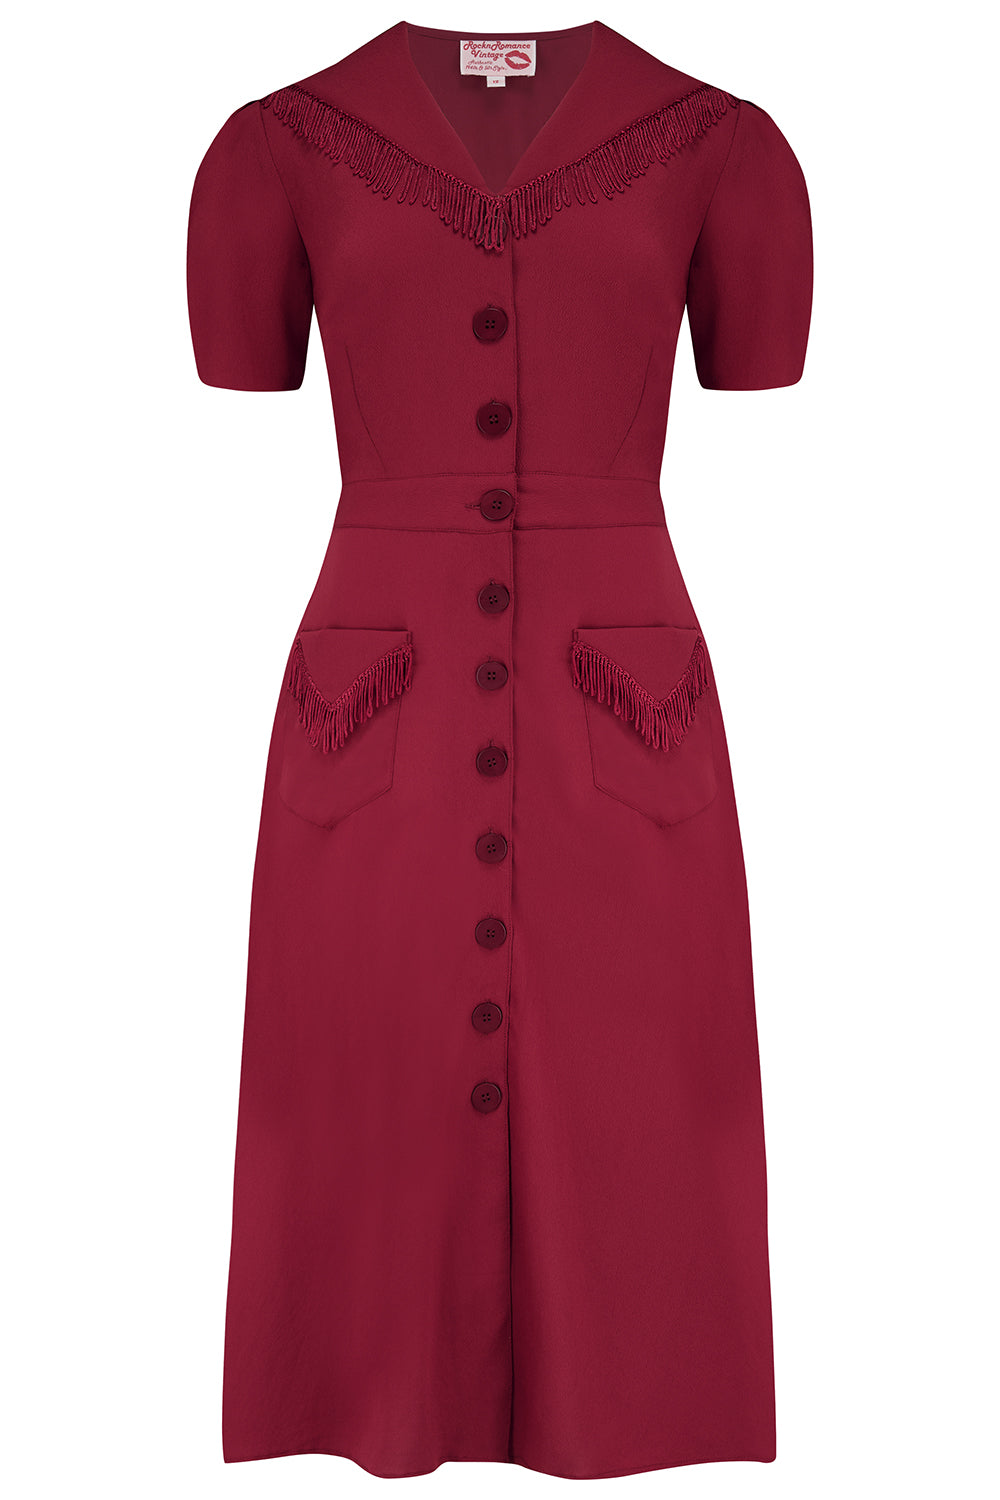 The "Dolly" Fringed Dress in Wine, Authentic 1950s Vintage Western Style